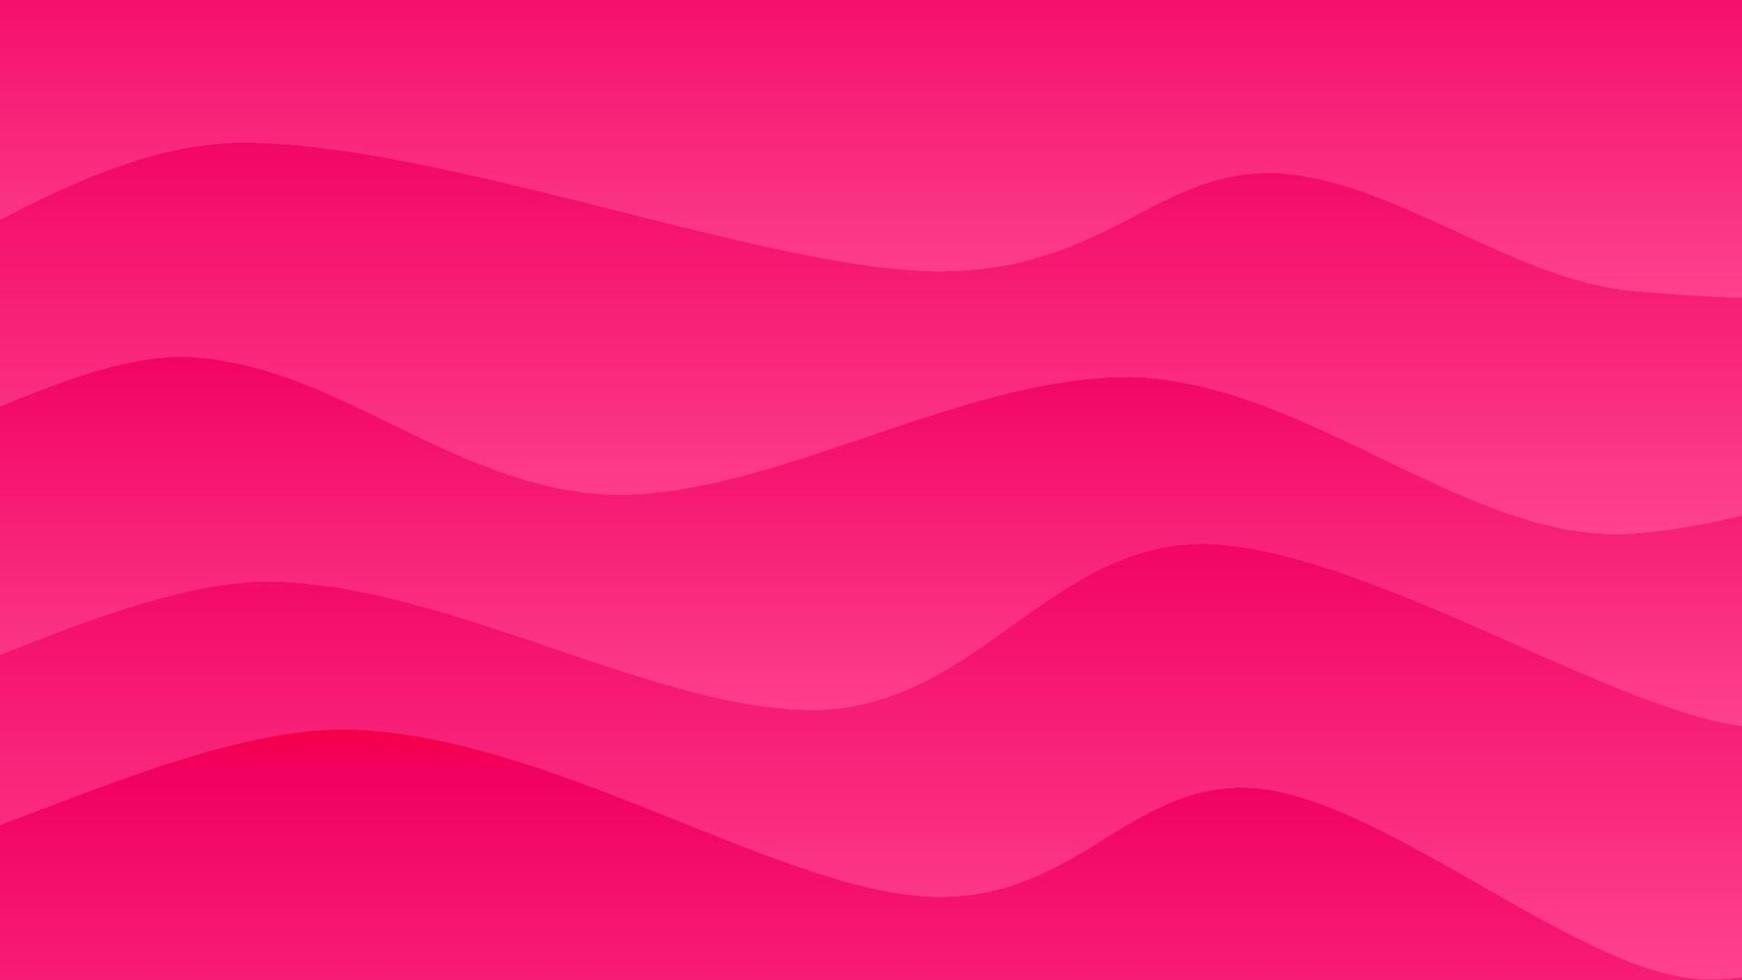 pink wave shape abstract background vector